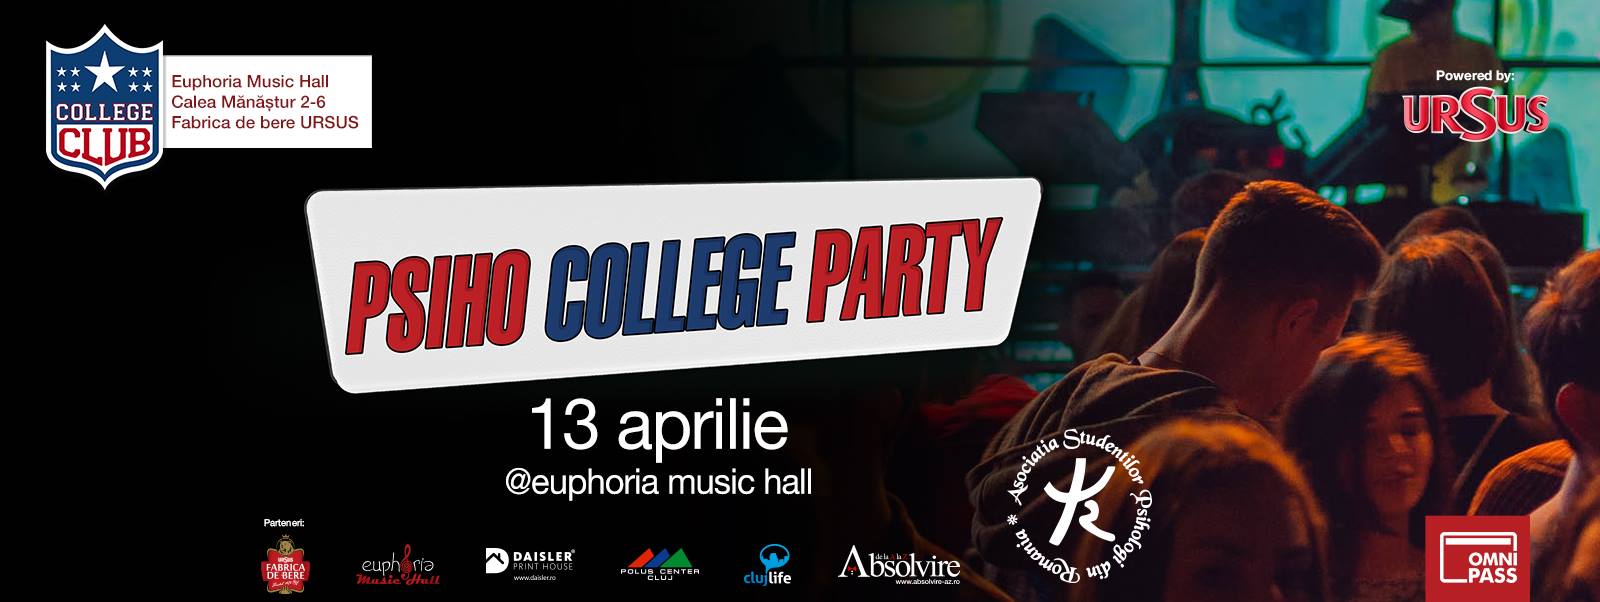 Psiho College Party @ Euphoria Music Hall